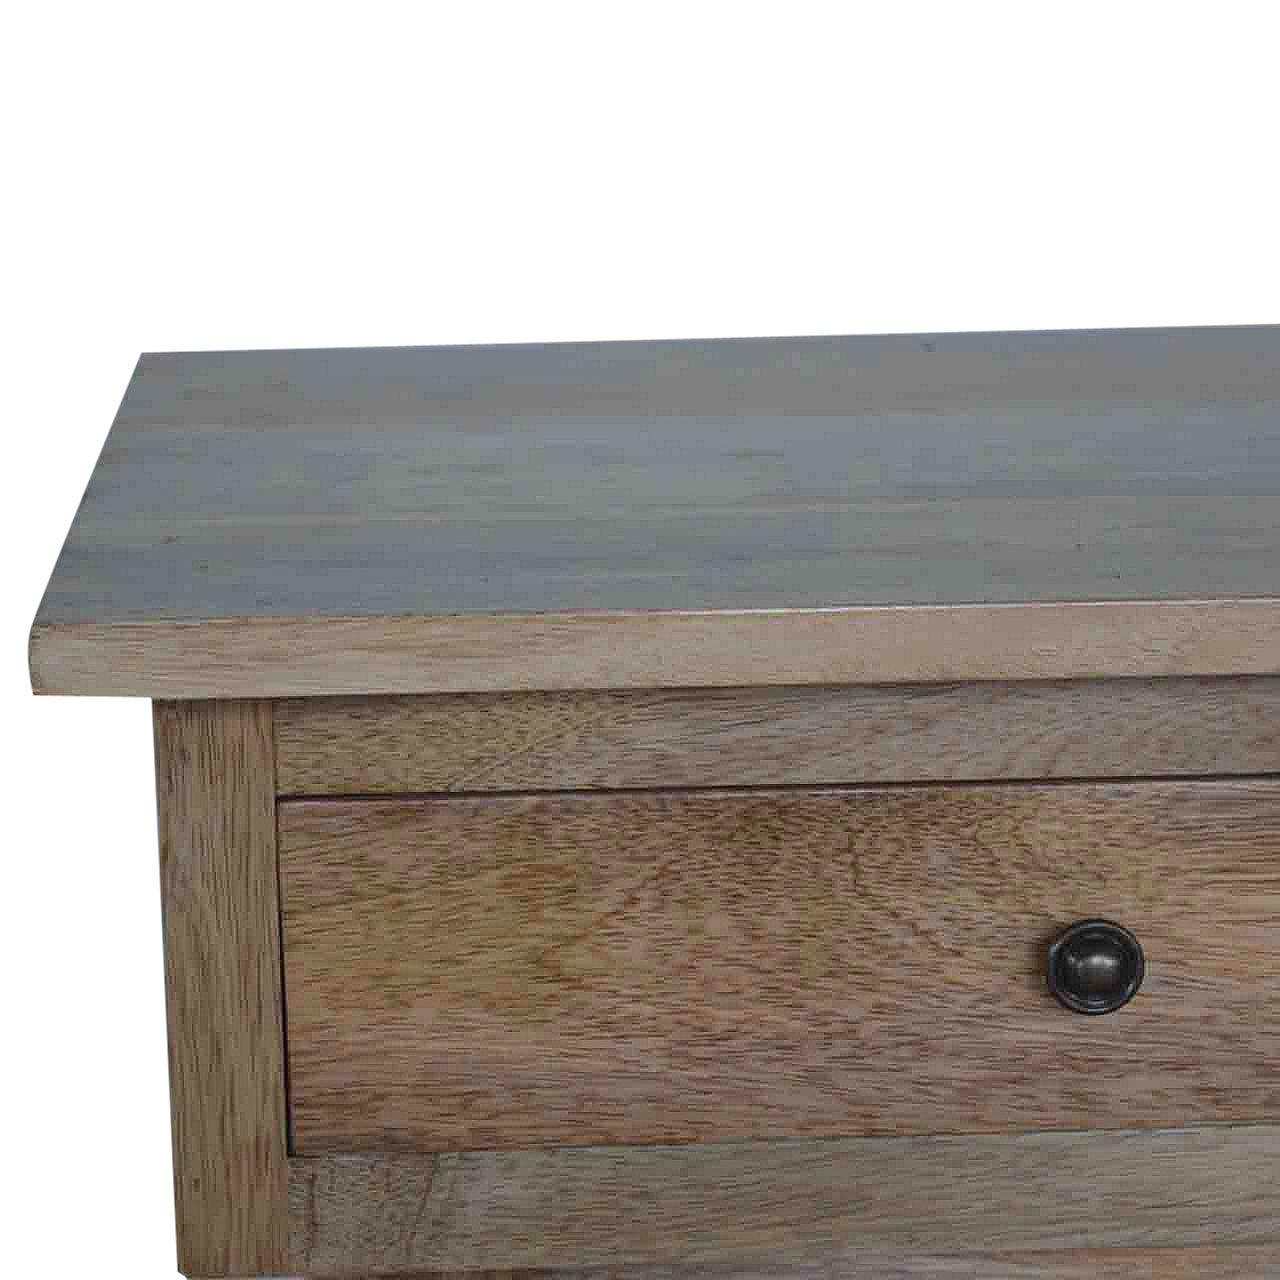 Hallway 2 Drawer Console Table by Artisan Furniture